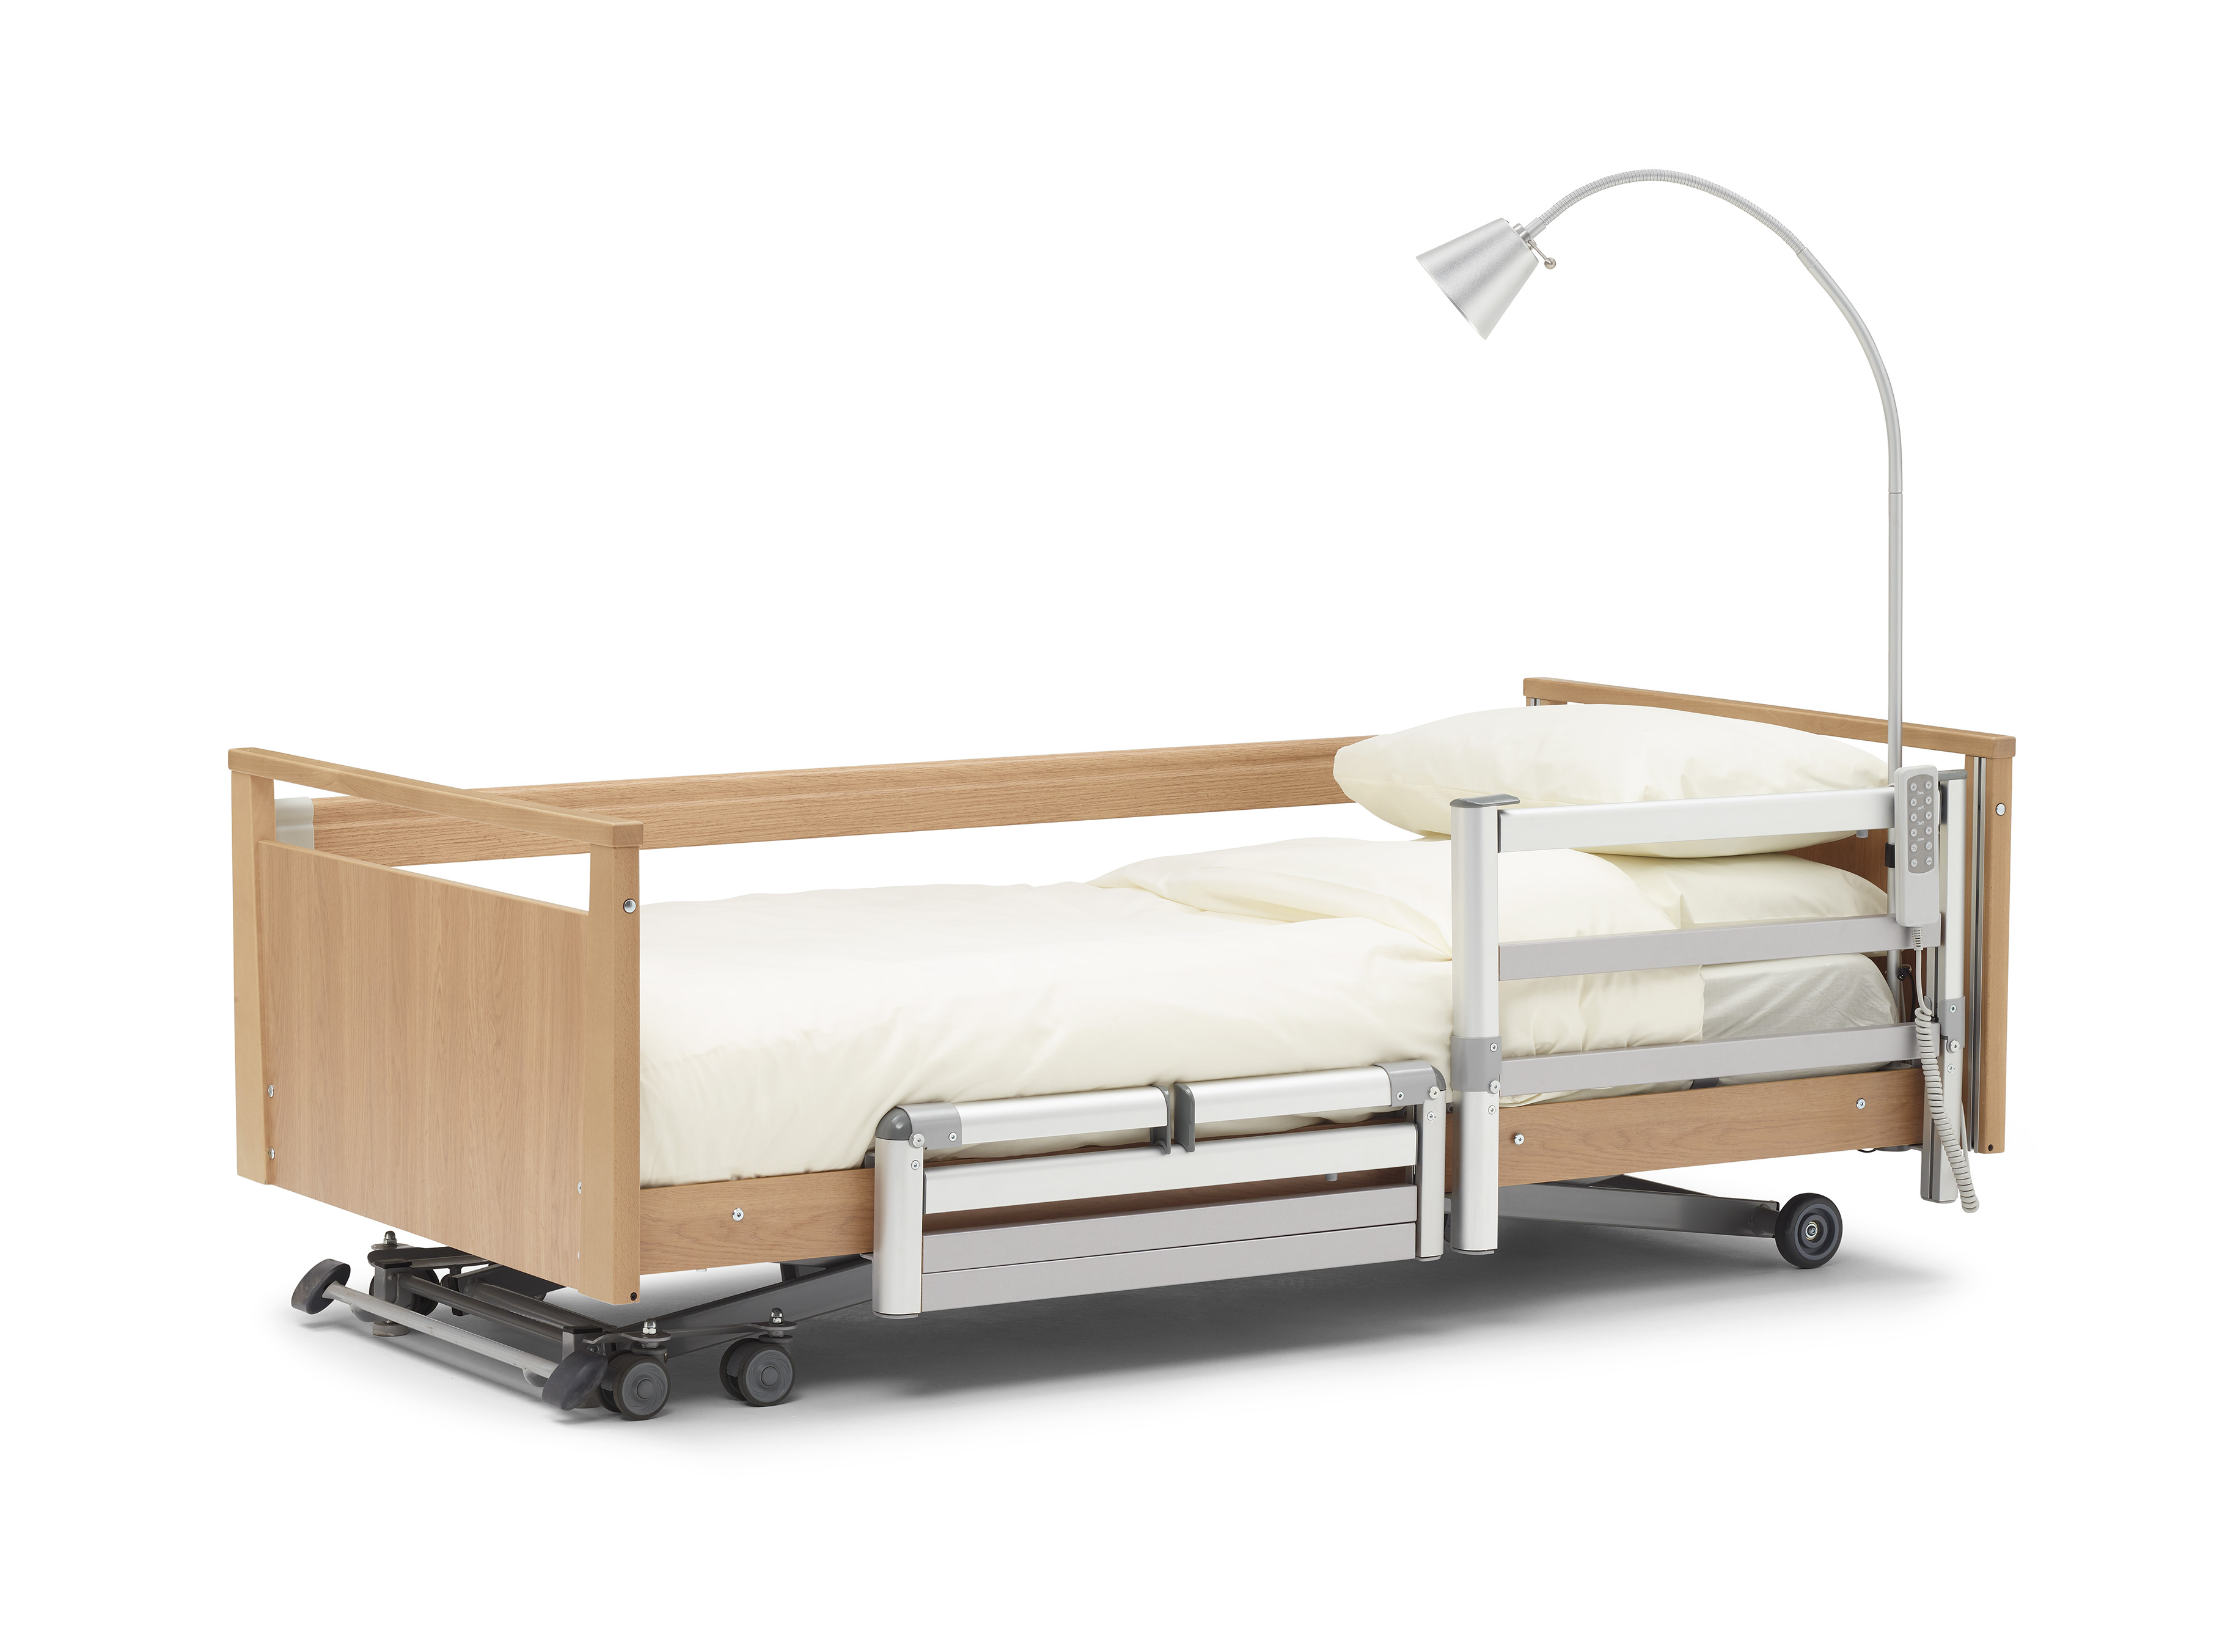 Impress 3 bed c/w Contemporary head/foot boards and side skirts only
Finish: Light Sorano Oak